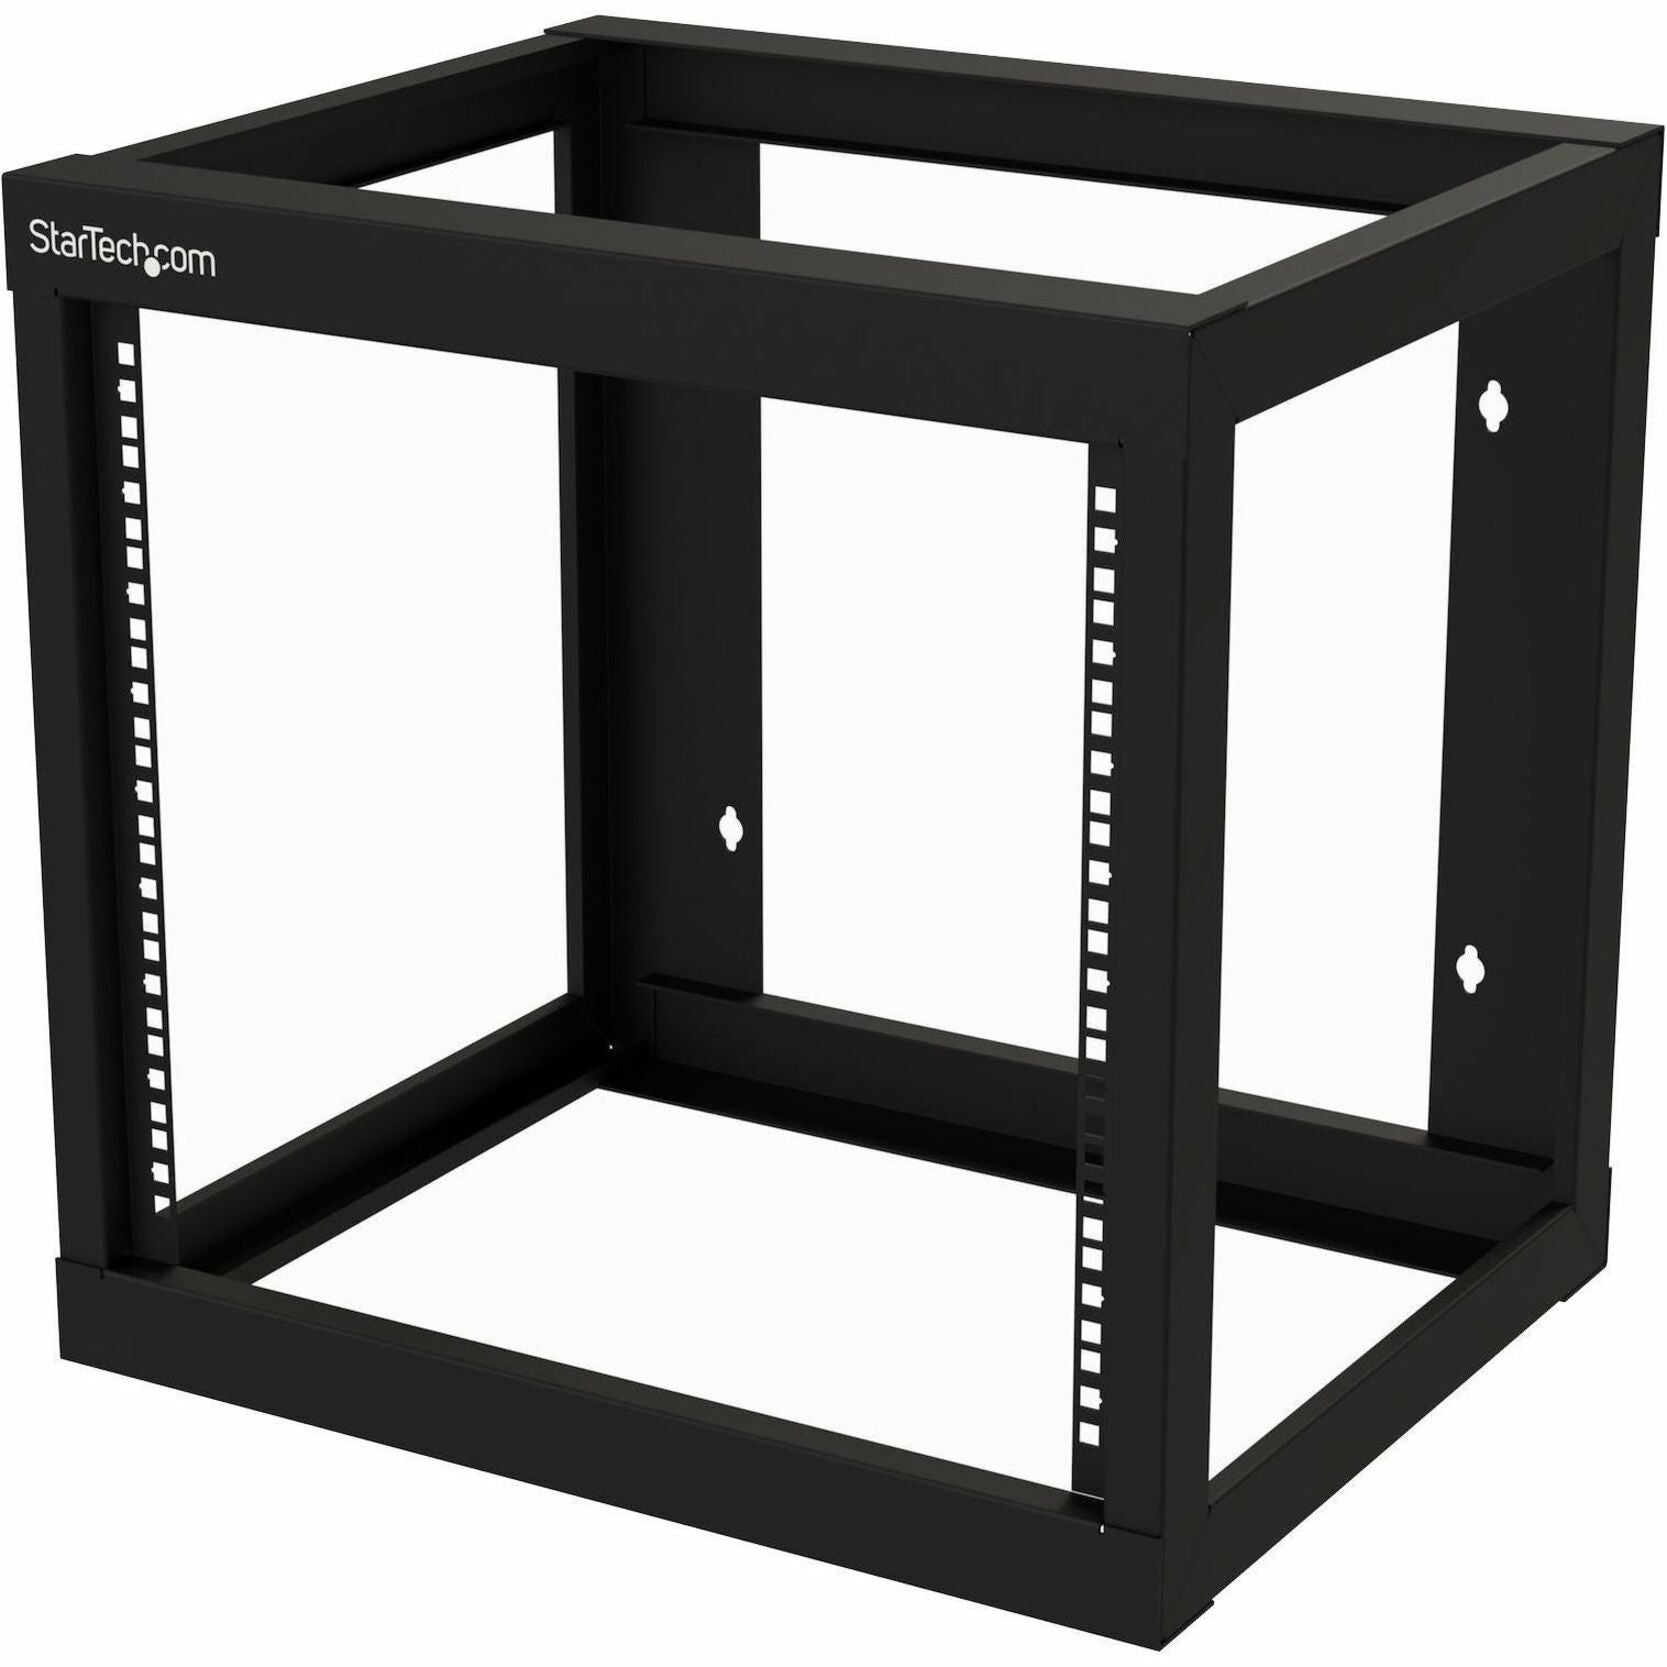 StarTech.com 9U 19" Wall Mount Network Rack - 17" Deep Open Frame for Server Room AV/Data/Patch Panel/IT/Computer Equipment w/Cage Nuts (RK919WALLO) Main image